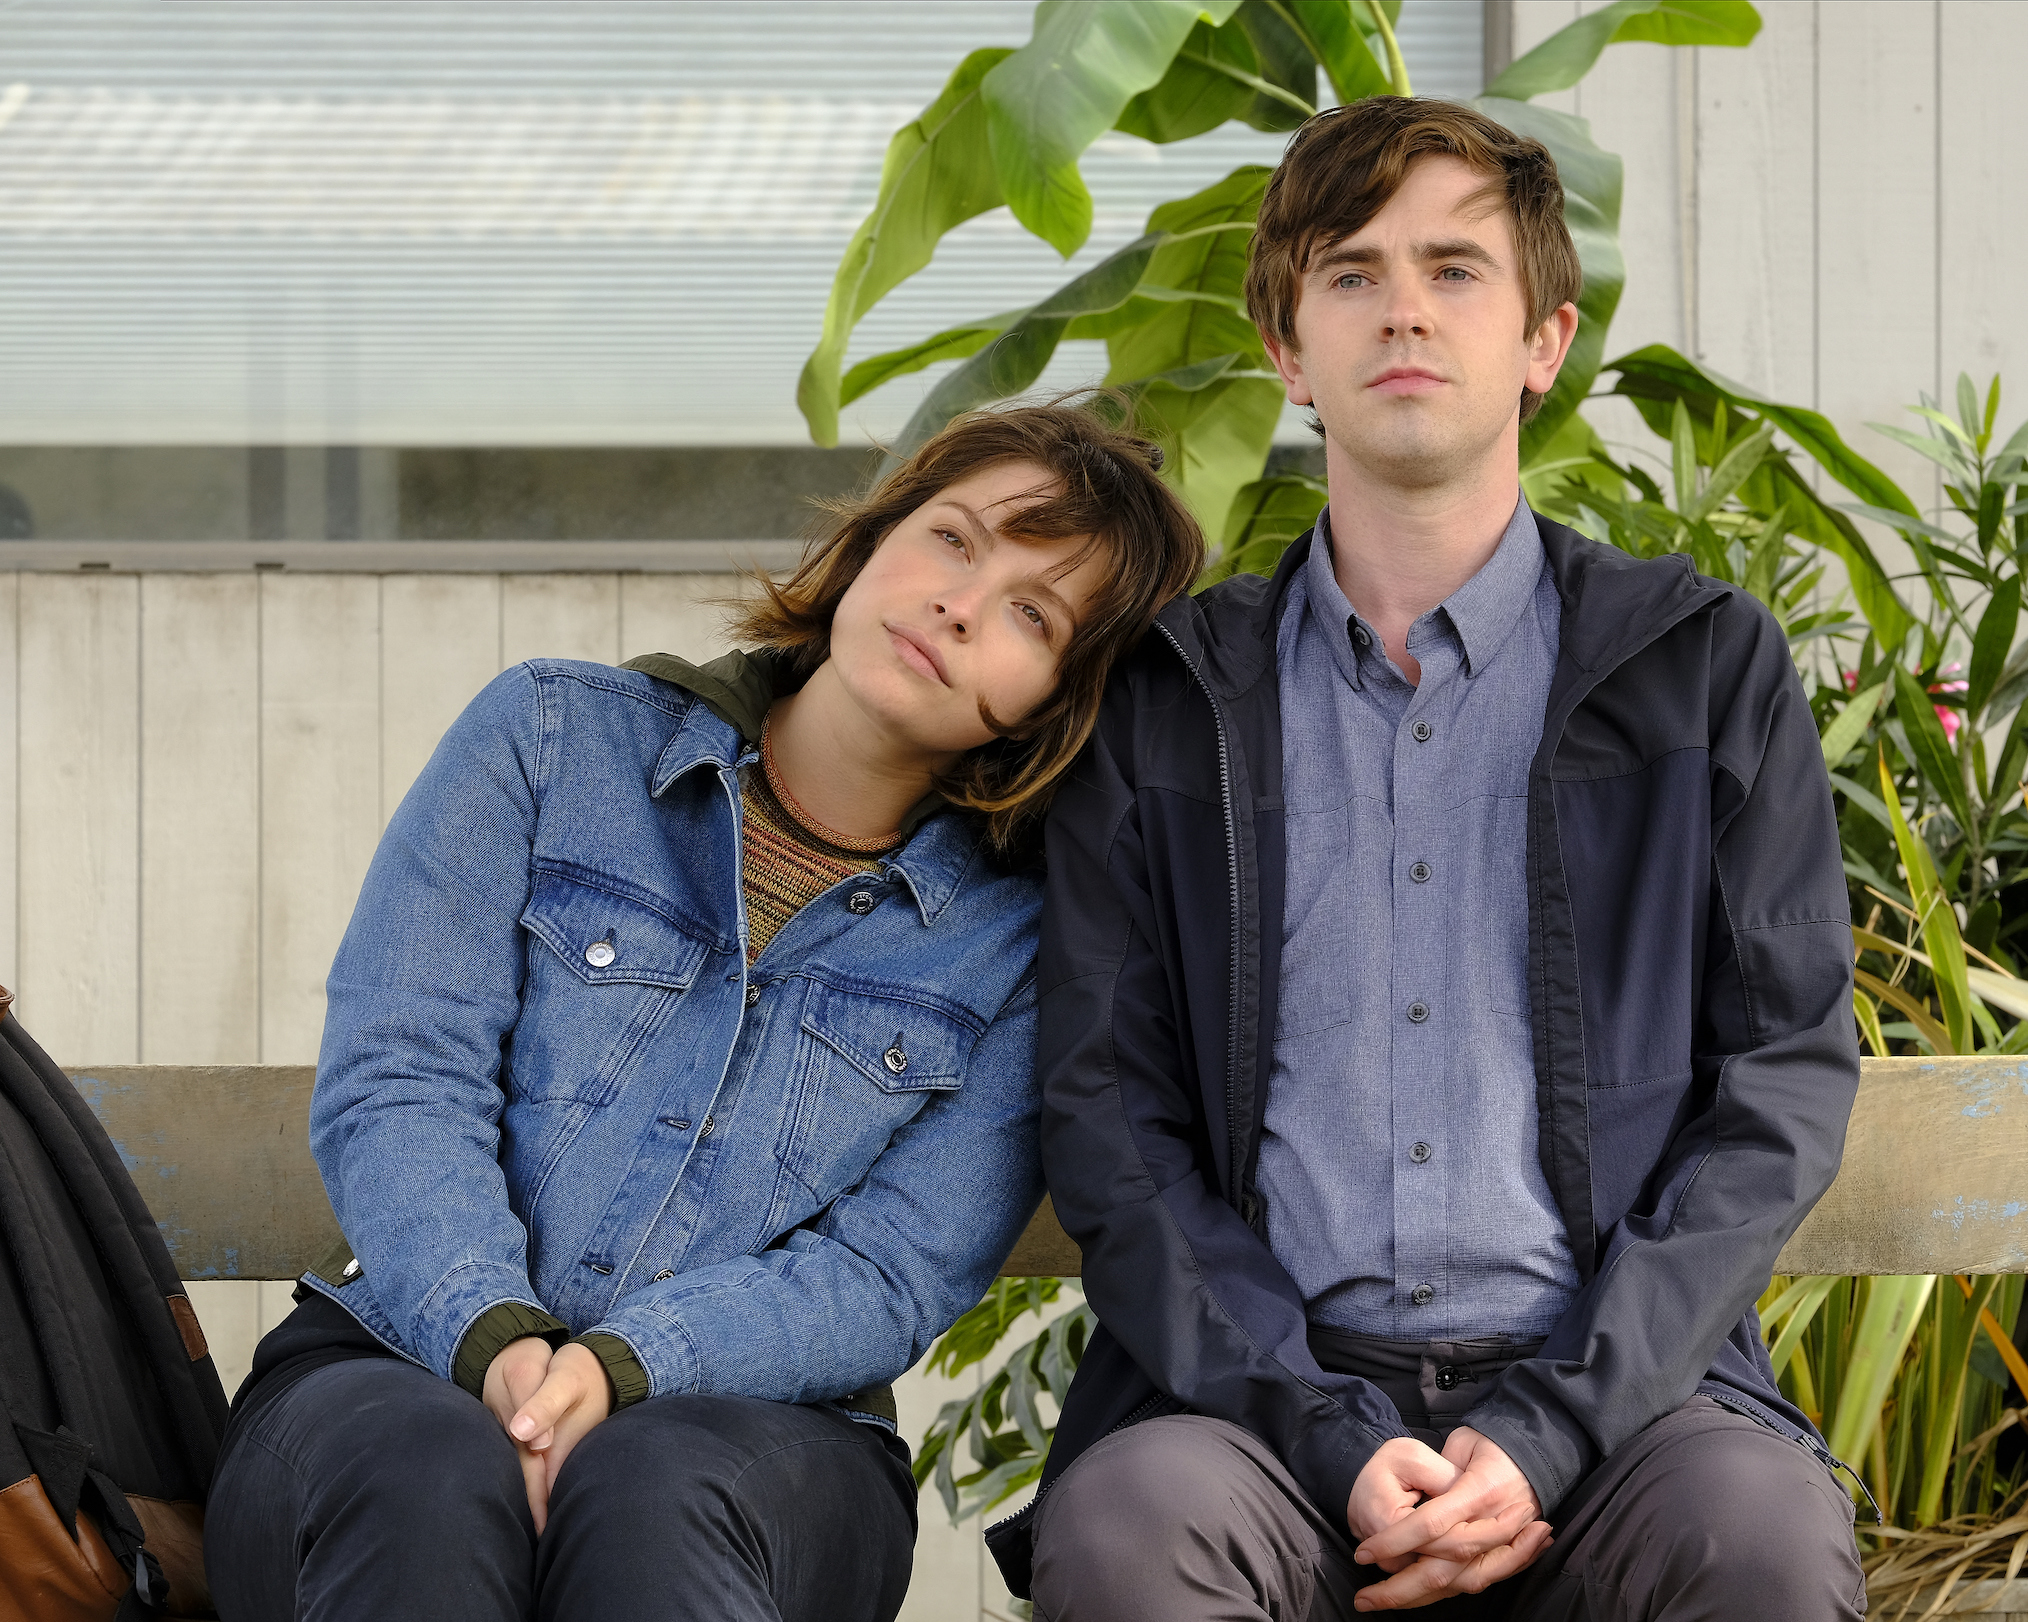 The Good Doctor' Finale: Freddie Highmore Says It Could 'Make or Break'  Shaun & Lea's Relationship